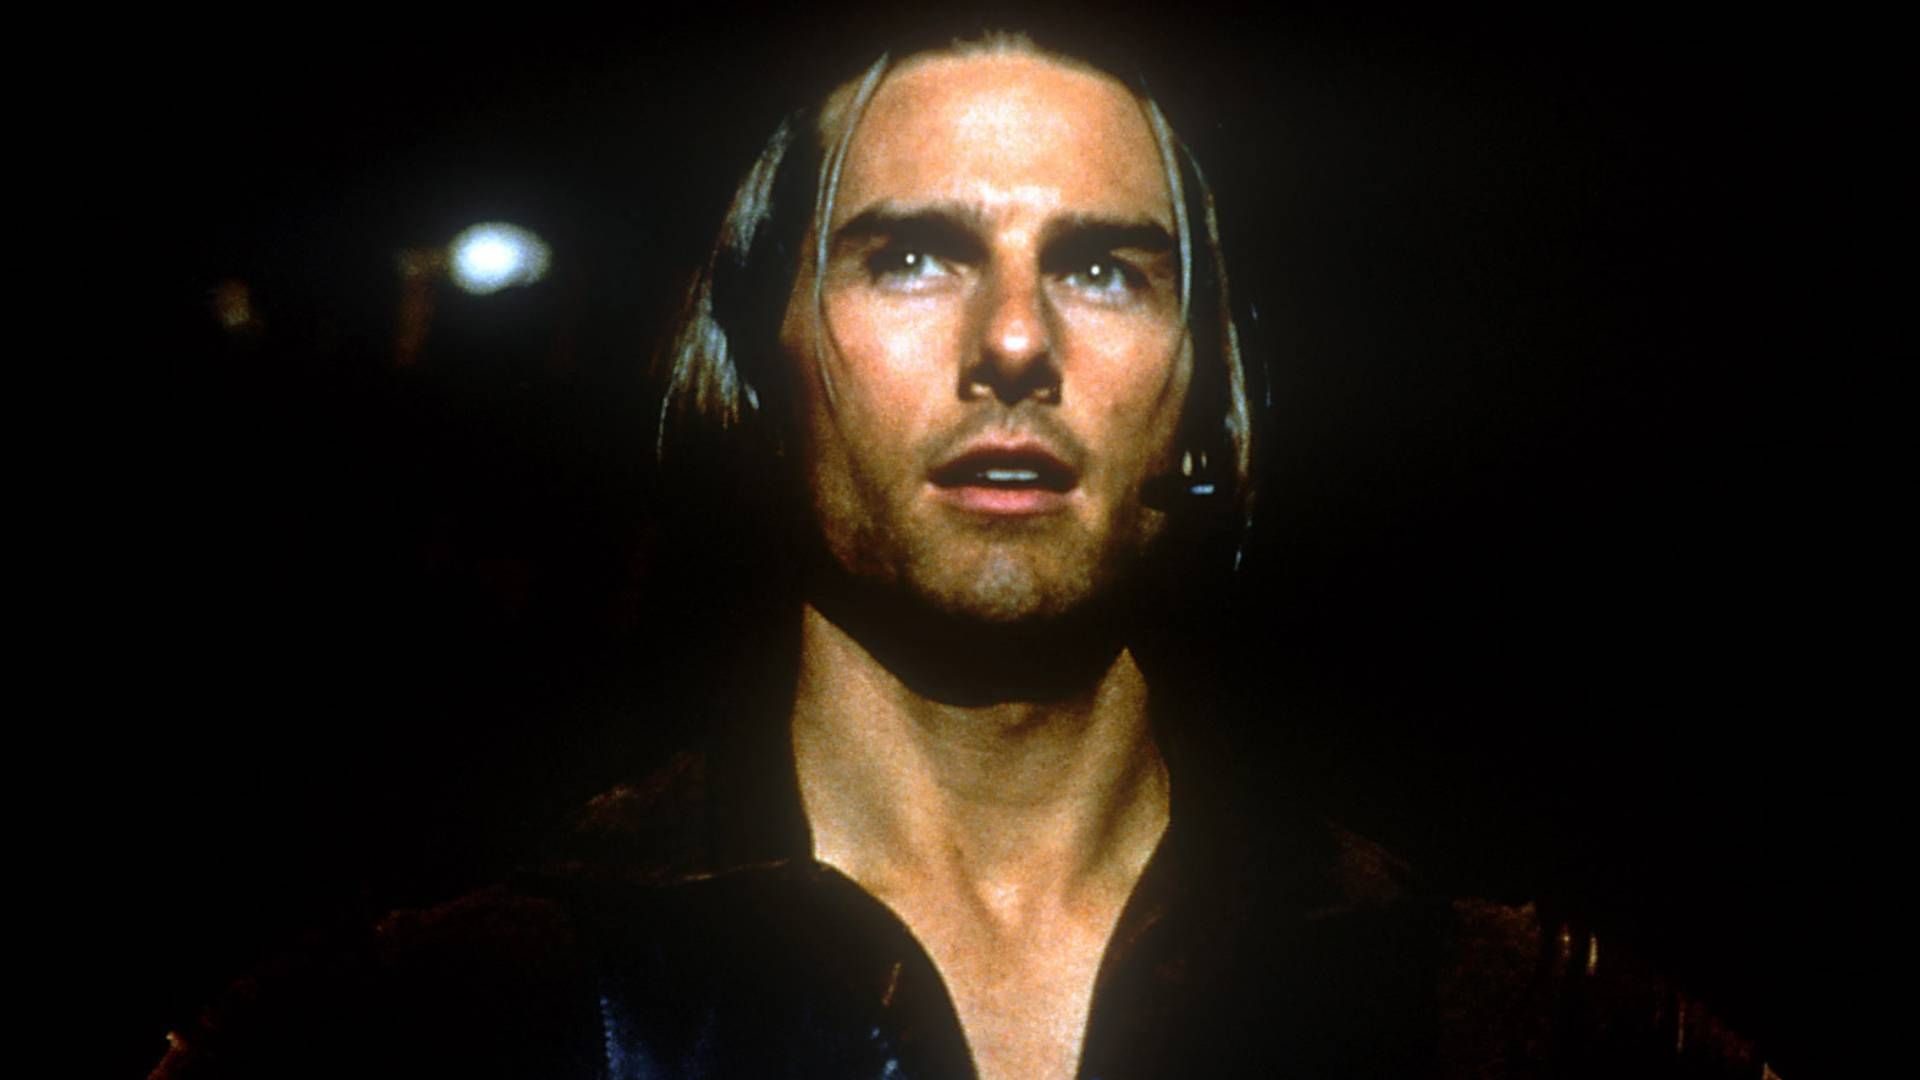 <p>                     Tom Cruise played a memorable part in Paul Thomas Anderson’s kaleidoscopic Magnolia as Frank T.J. Mackey, a crass motivational speaker. He’s in his element as the misogynistic pick-up artist, which we see glimpses of throughout the movie. The best of these is his "tame it" speech to a group of like-minded misanthropists as he tells them to take what they feel they deserve. In a cast filled with stars like Philip Seymour Hoffman and Julianne Moore, Cruise gives it all in a performance that really asks him to <em>go there</em>.                   </p>